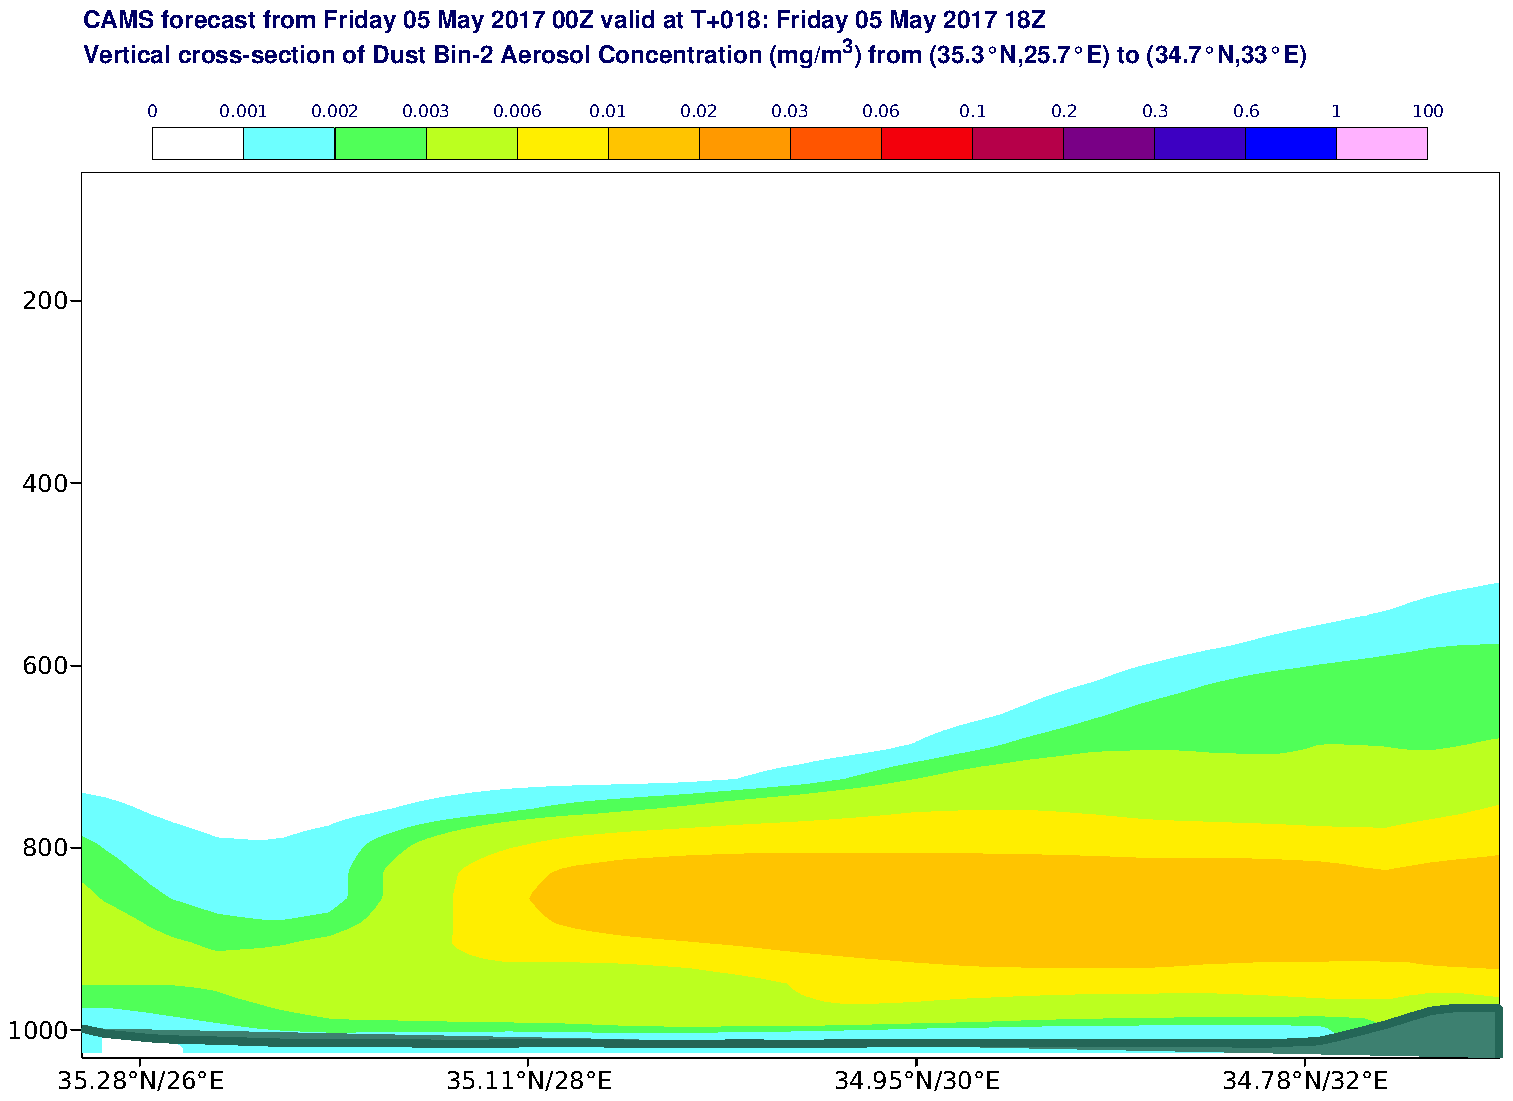 Vertical cross-section of Dust Bin-2 Aerosol Concentration (mg/m3) valid at T18 - 2017-05-05 18:00